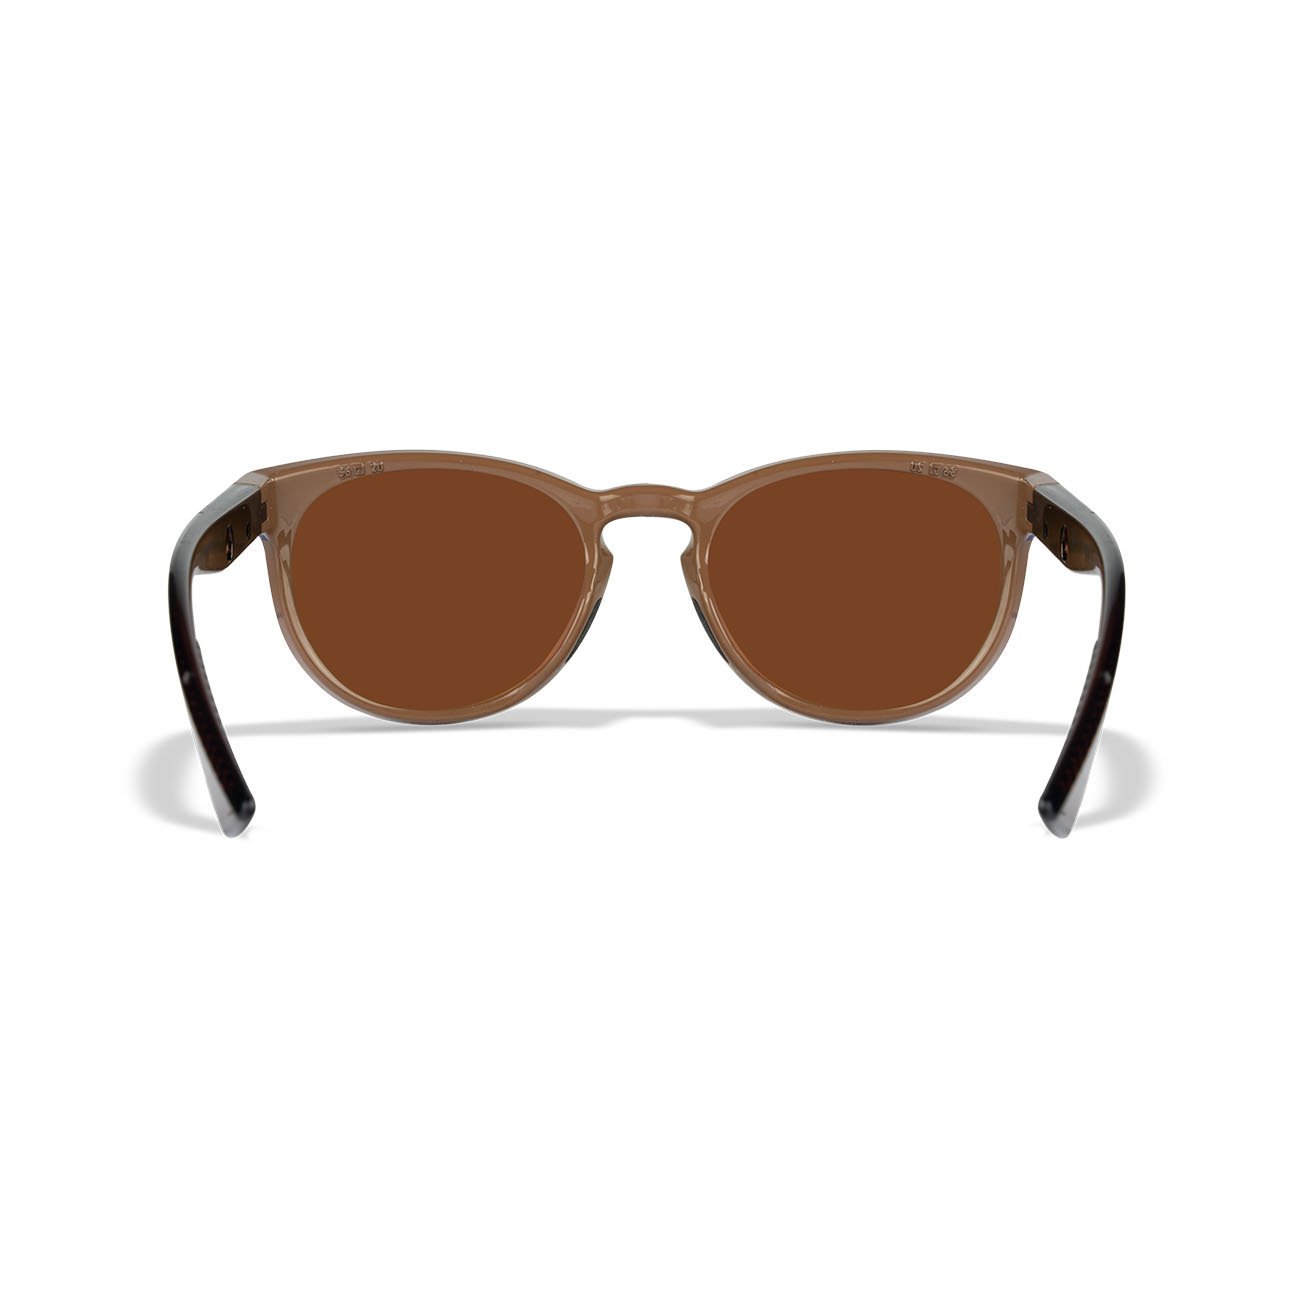 New Carp Shop Europe Wiley X – COVERT Captivate Polarized Copper Gloss Coffee/Crystal Brown Frame